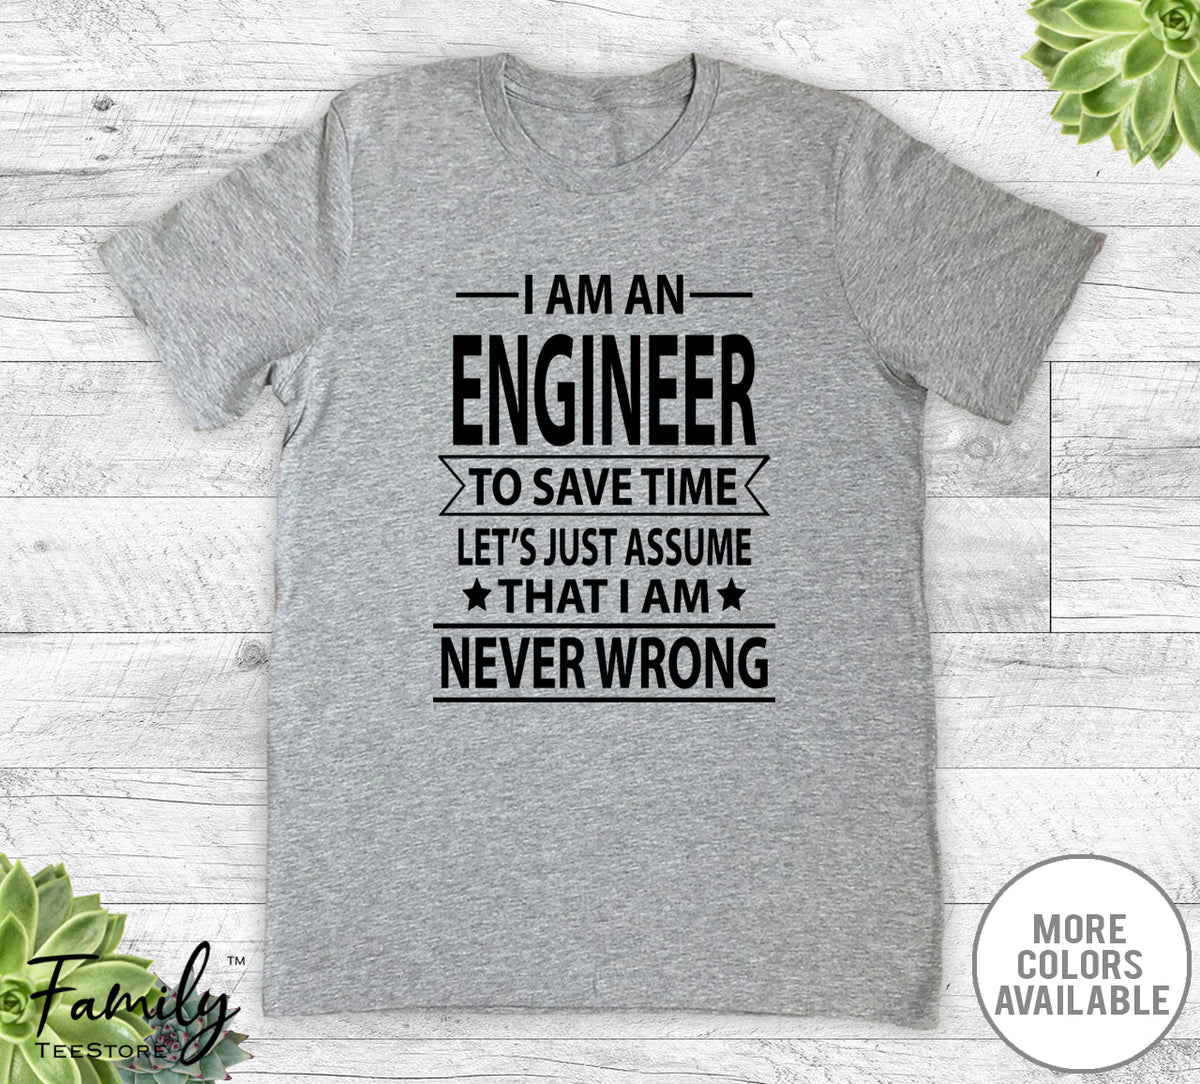 I Am An Engineer To Save Time - Unisex T-shirt - Engineer Shirt - Engineer Gift